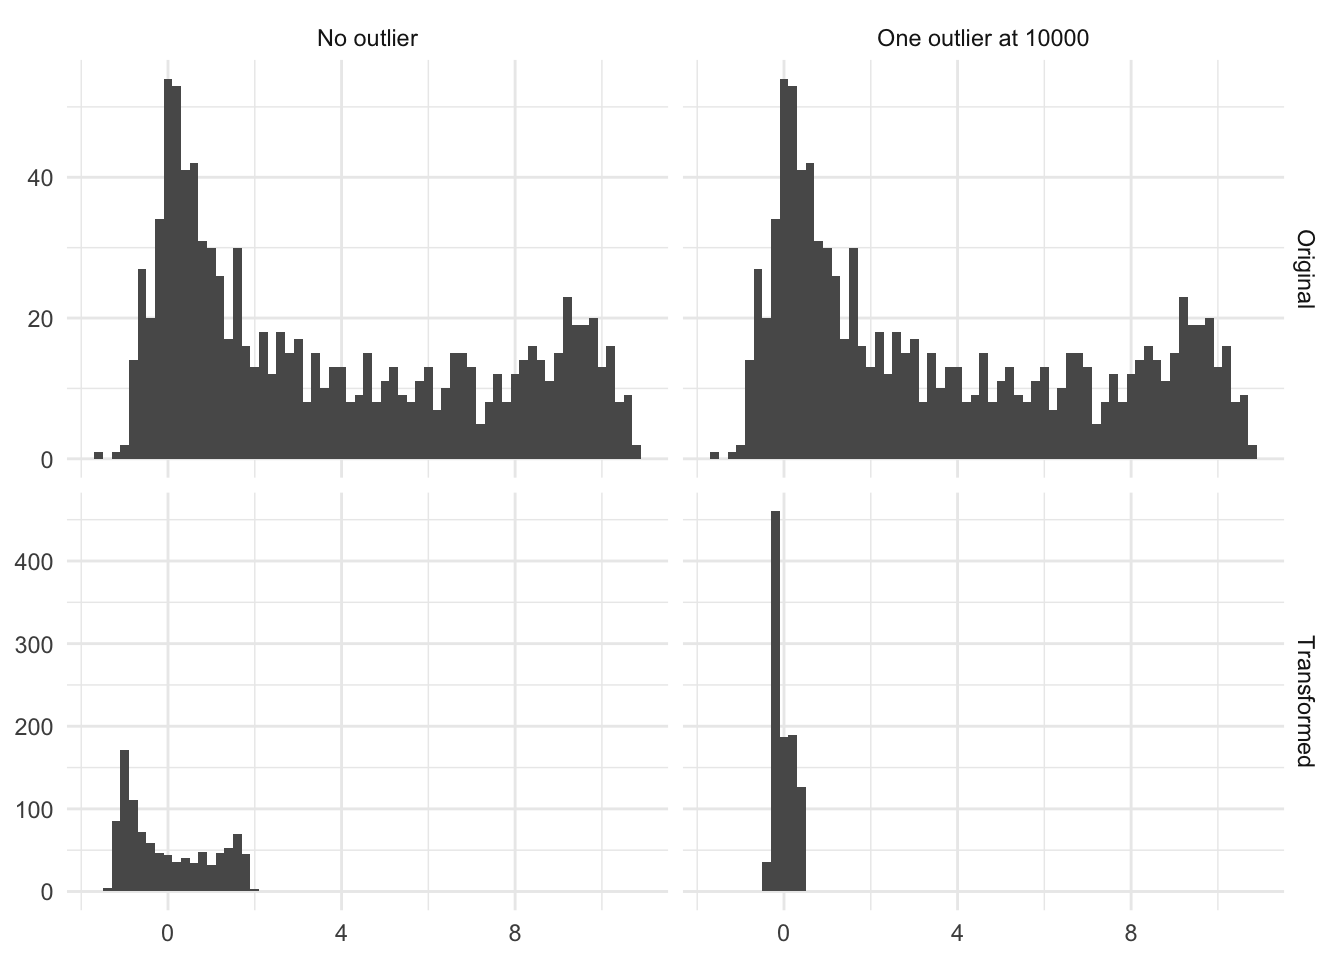 4 histograms of distribution in 2 columns. The top distribution shows the same bimodal distribution. Below are the same distributions after being normalized. The right column shows the effect of having one outlier at 10000, which in this case made the transformed distribution about a fifth of the width.